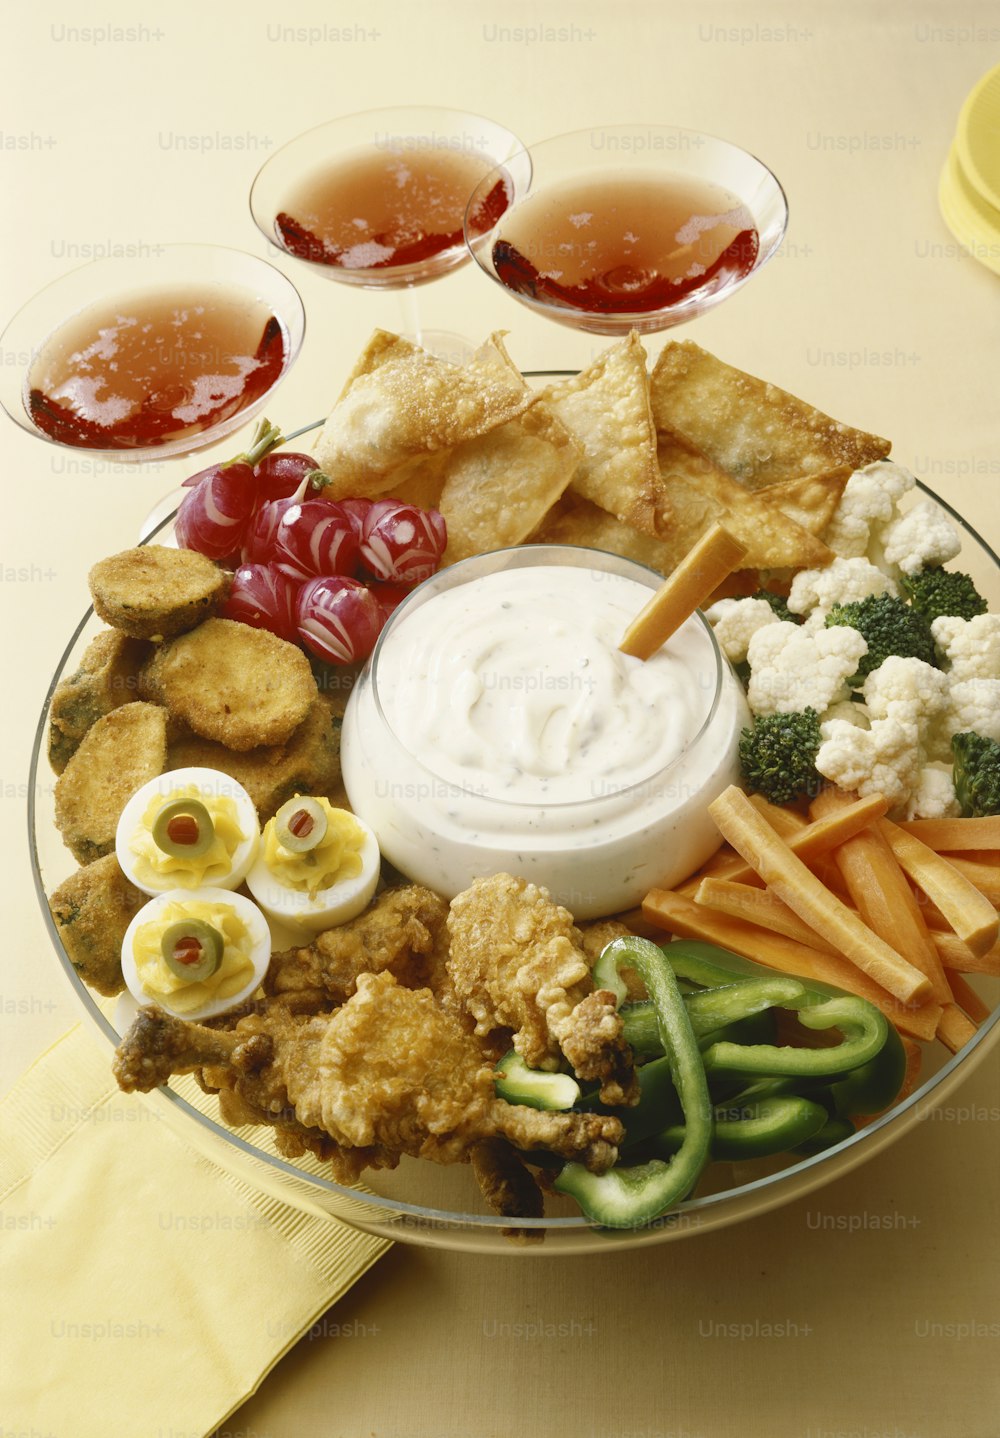 a plate of food with dips, crackers, veggies, and